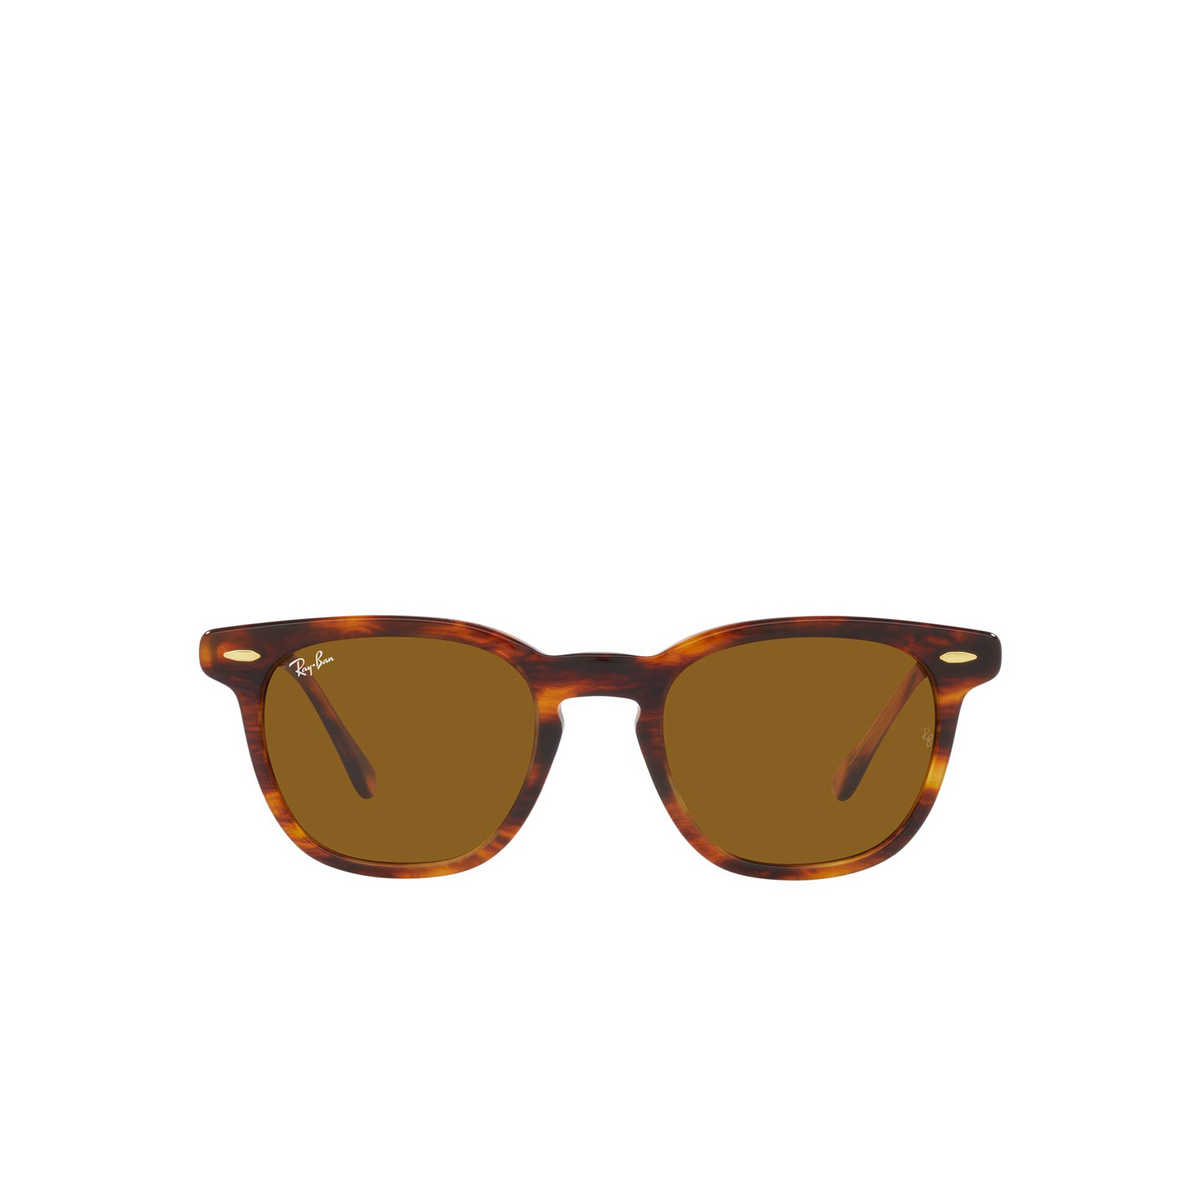 Ray-Ban® Square Sunglasses: Hawkeye RB2298 color Striped Havana 954/33 - front view.